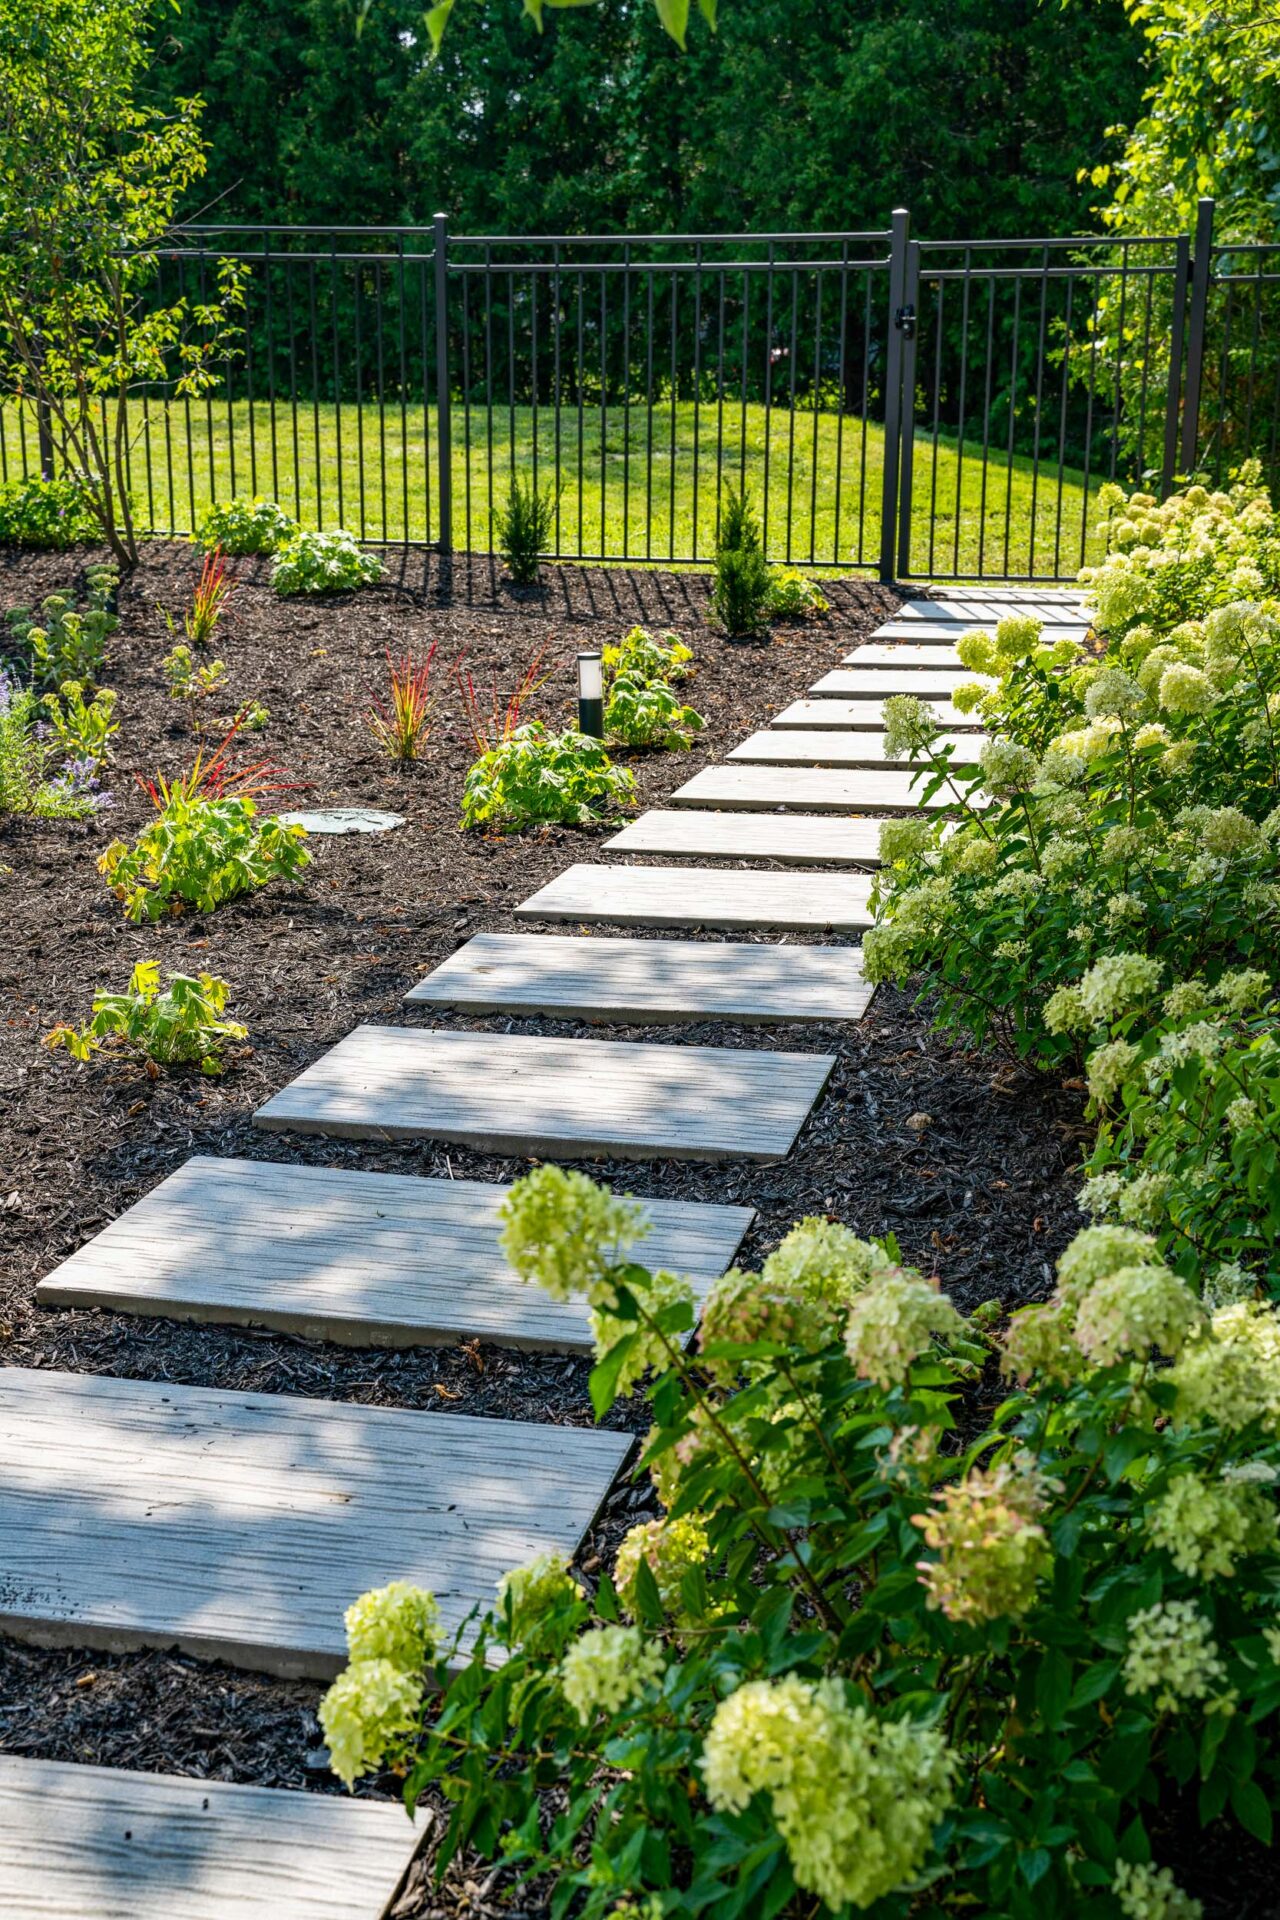 A landscaped garden with a stepping stone path, hydrangeas, freshly planted flowers, shrubs, mulched beds, and a metal fence under a sunny sky.